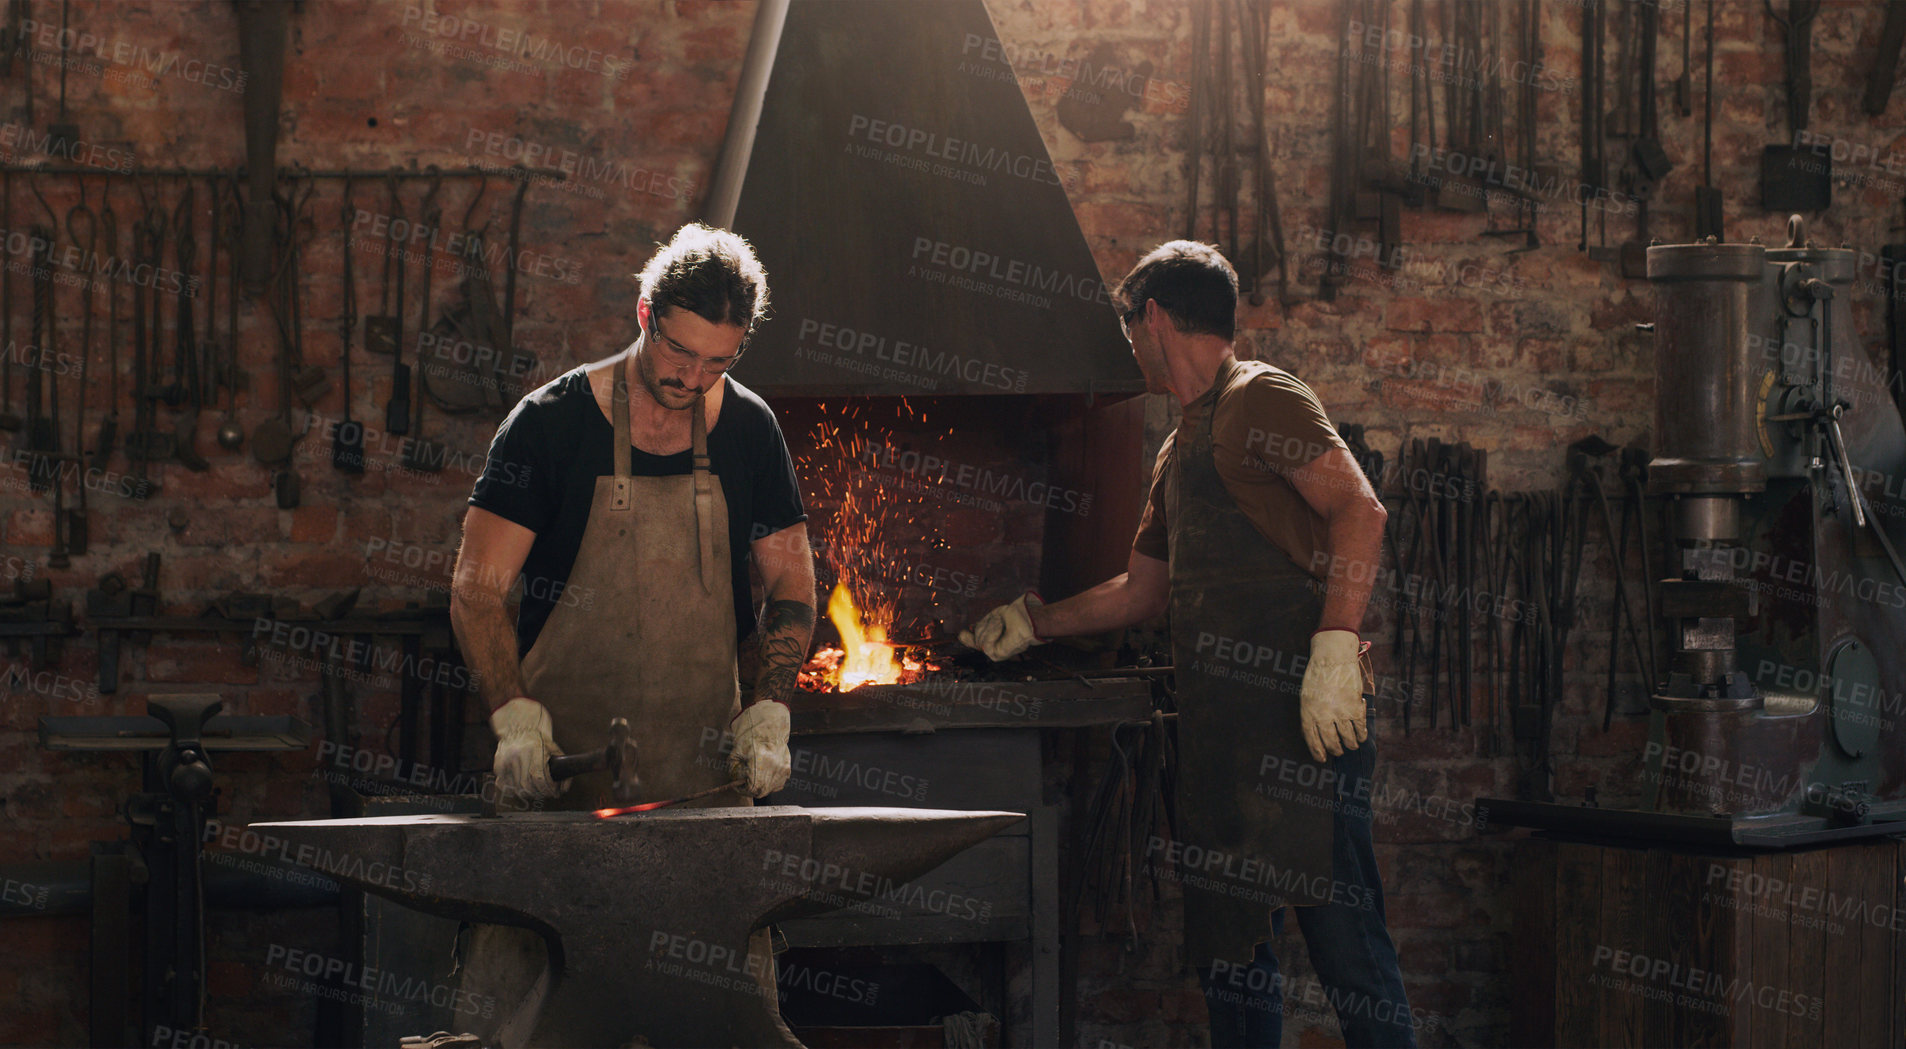 Buy stock photo Hammer, anvil and fire with men working in a foundry for metal work manufacturing or production. Industry, welding and trade with blacksmith craftsmen in a steel workshop, plant or industrial forge